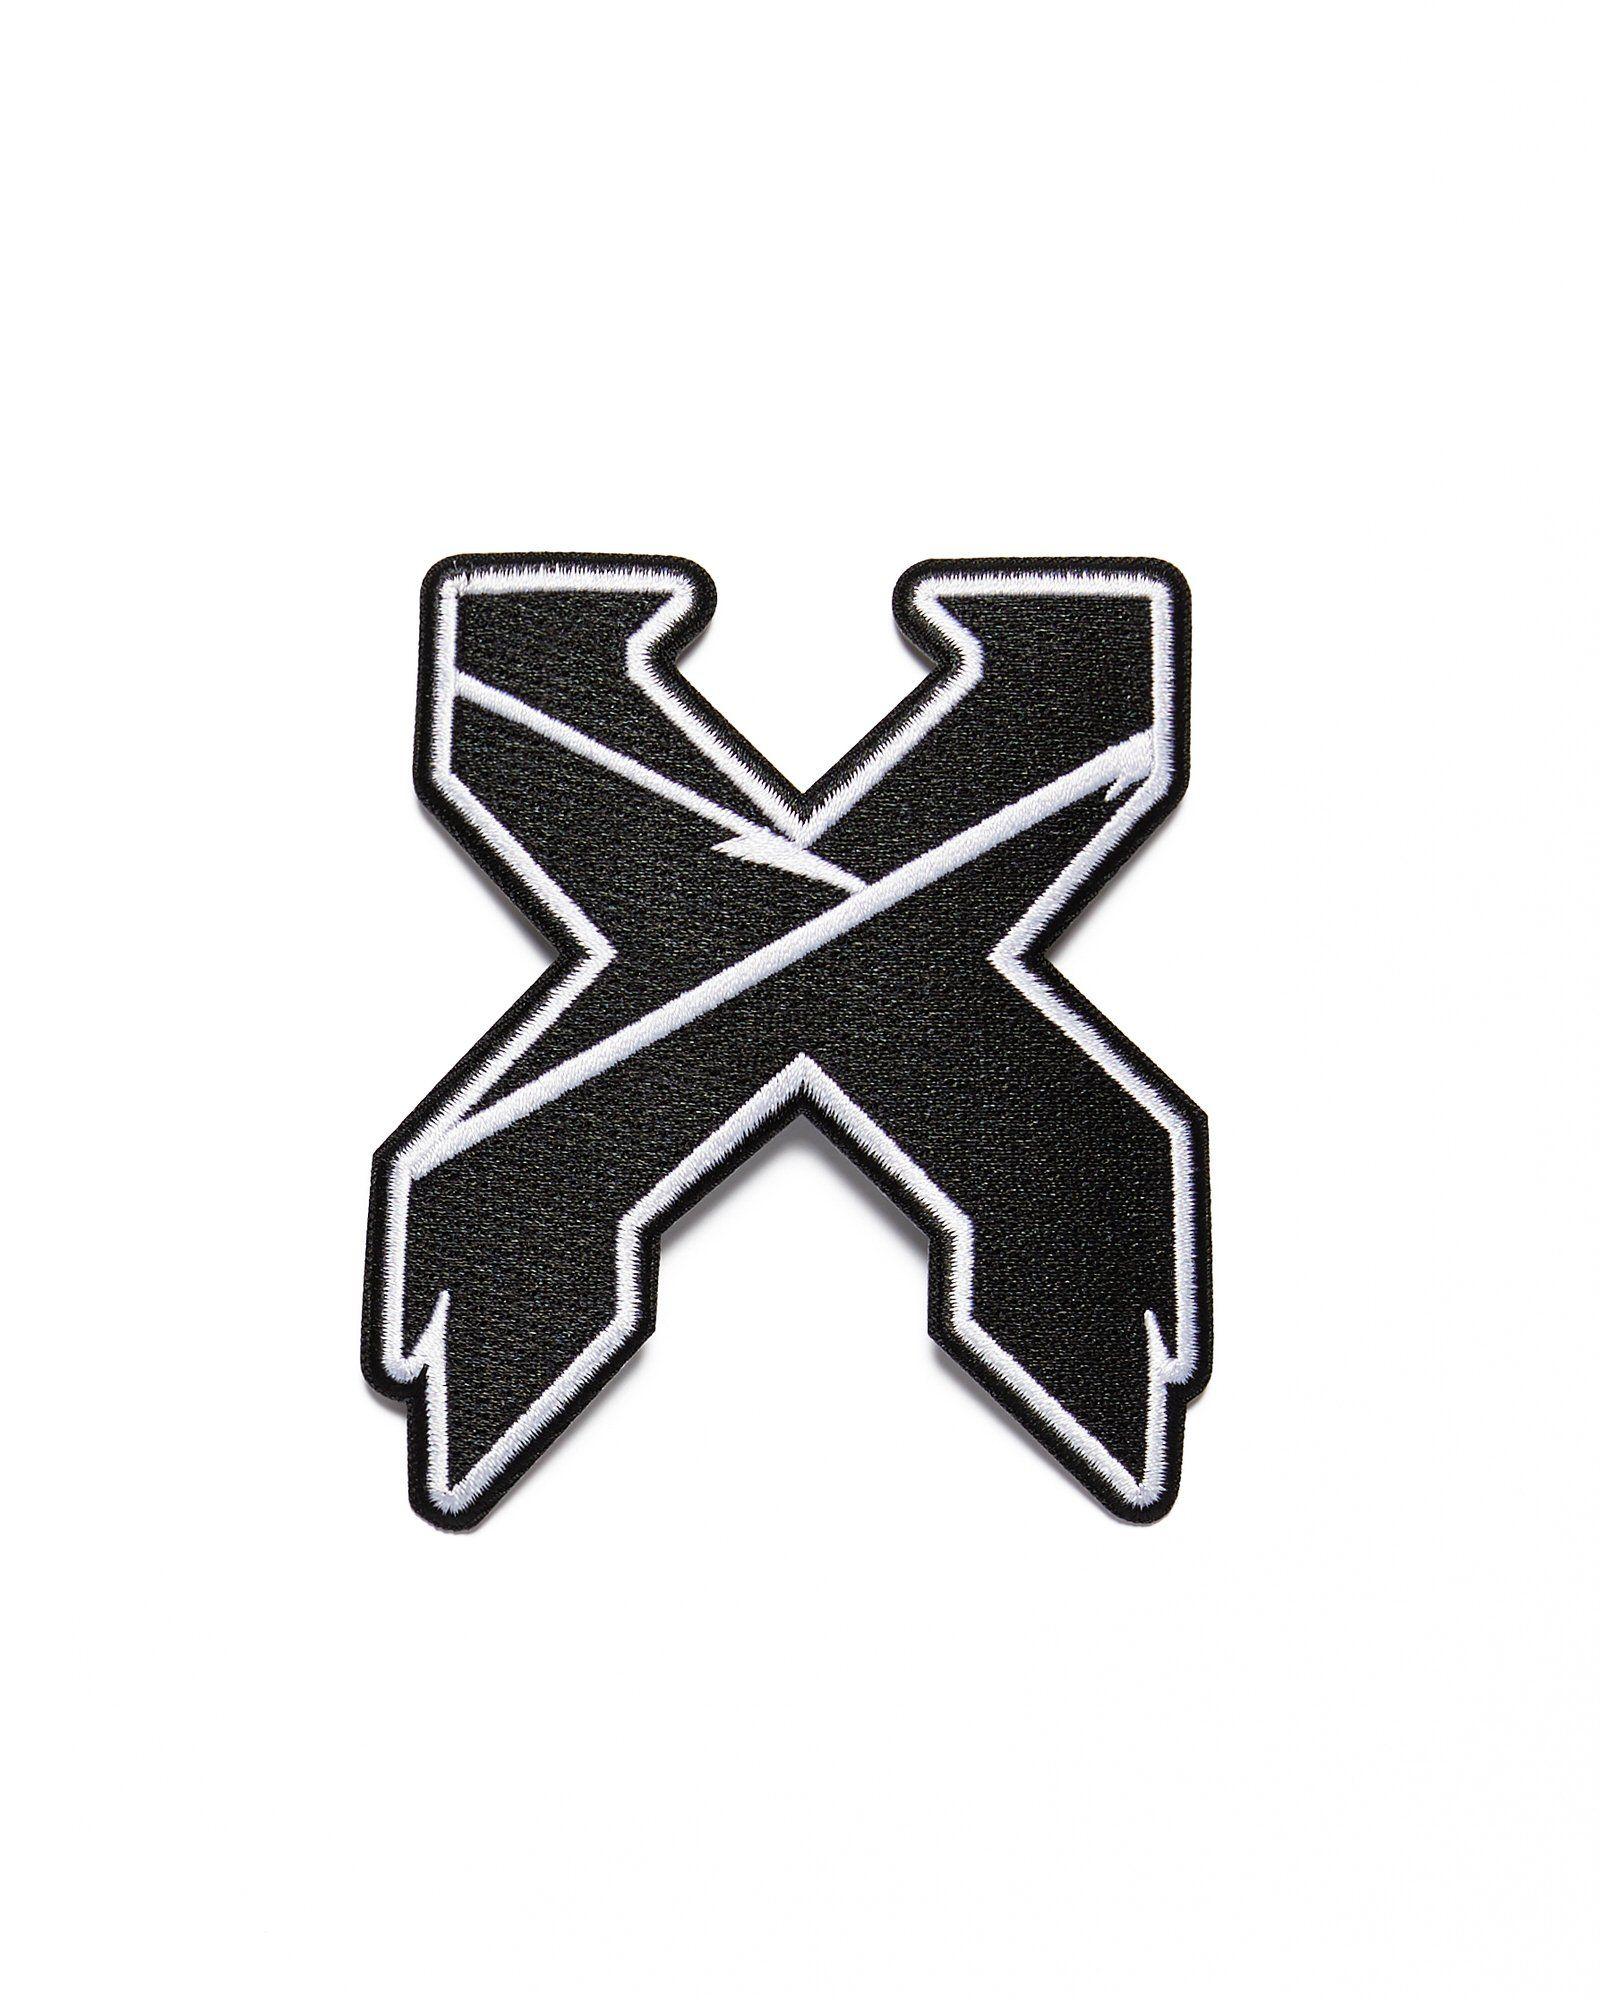 Excision Logo - Excision 'Sliced' Logo Patch x 3.5